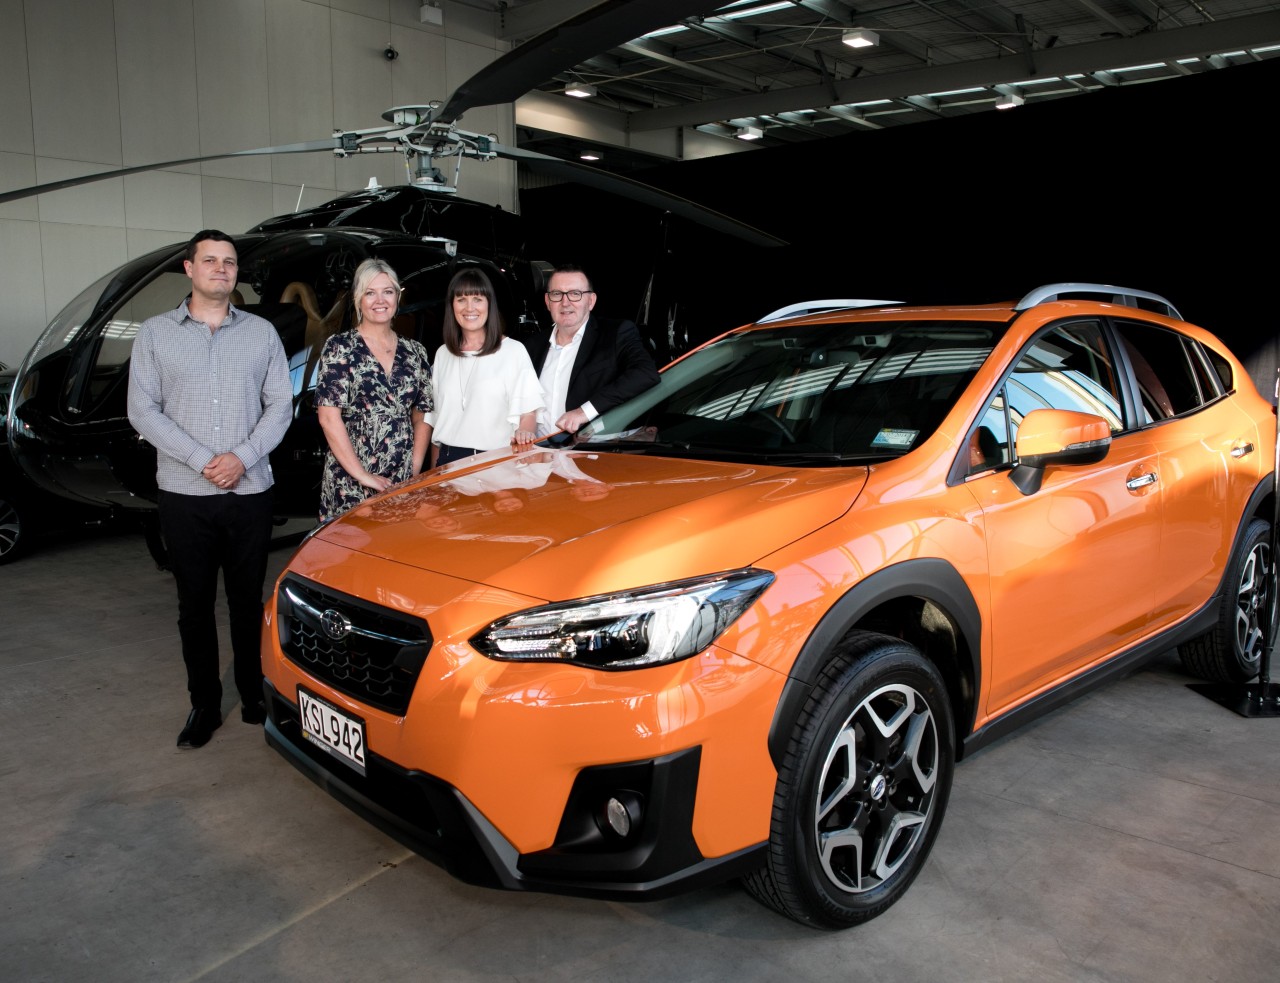 Pictured with the award-winning Subaru XV are (from left) NZ Autocar Editor Kyle Cassidy, AMI Community Engagement Manager Eve Whitwell, Subaru of NZ Marketing Manager Daile Stephens and Subaru of NZ Managing Director Wallis Dumper. PHOTO: CARMEN BIRD.